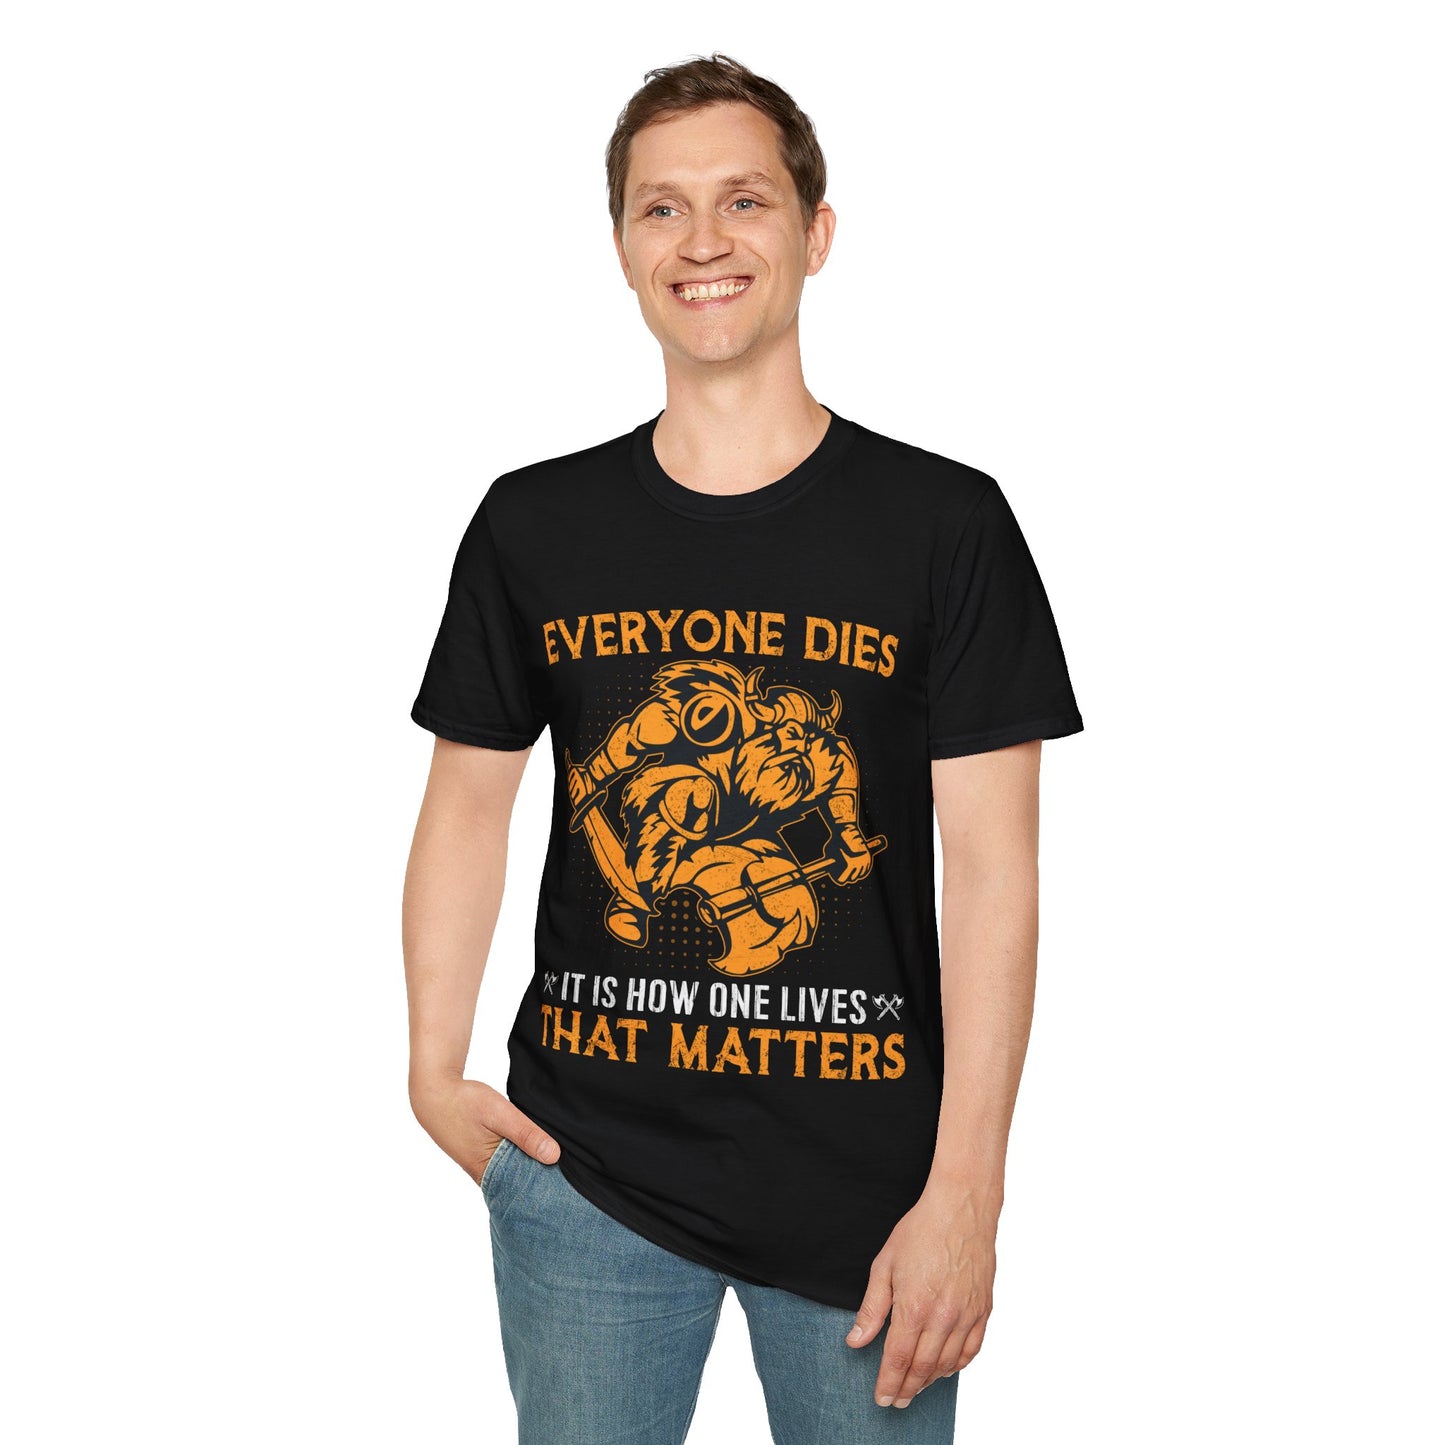 Everyone Dies It Is How One Lives That Matters T-Shirt